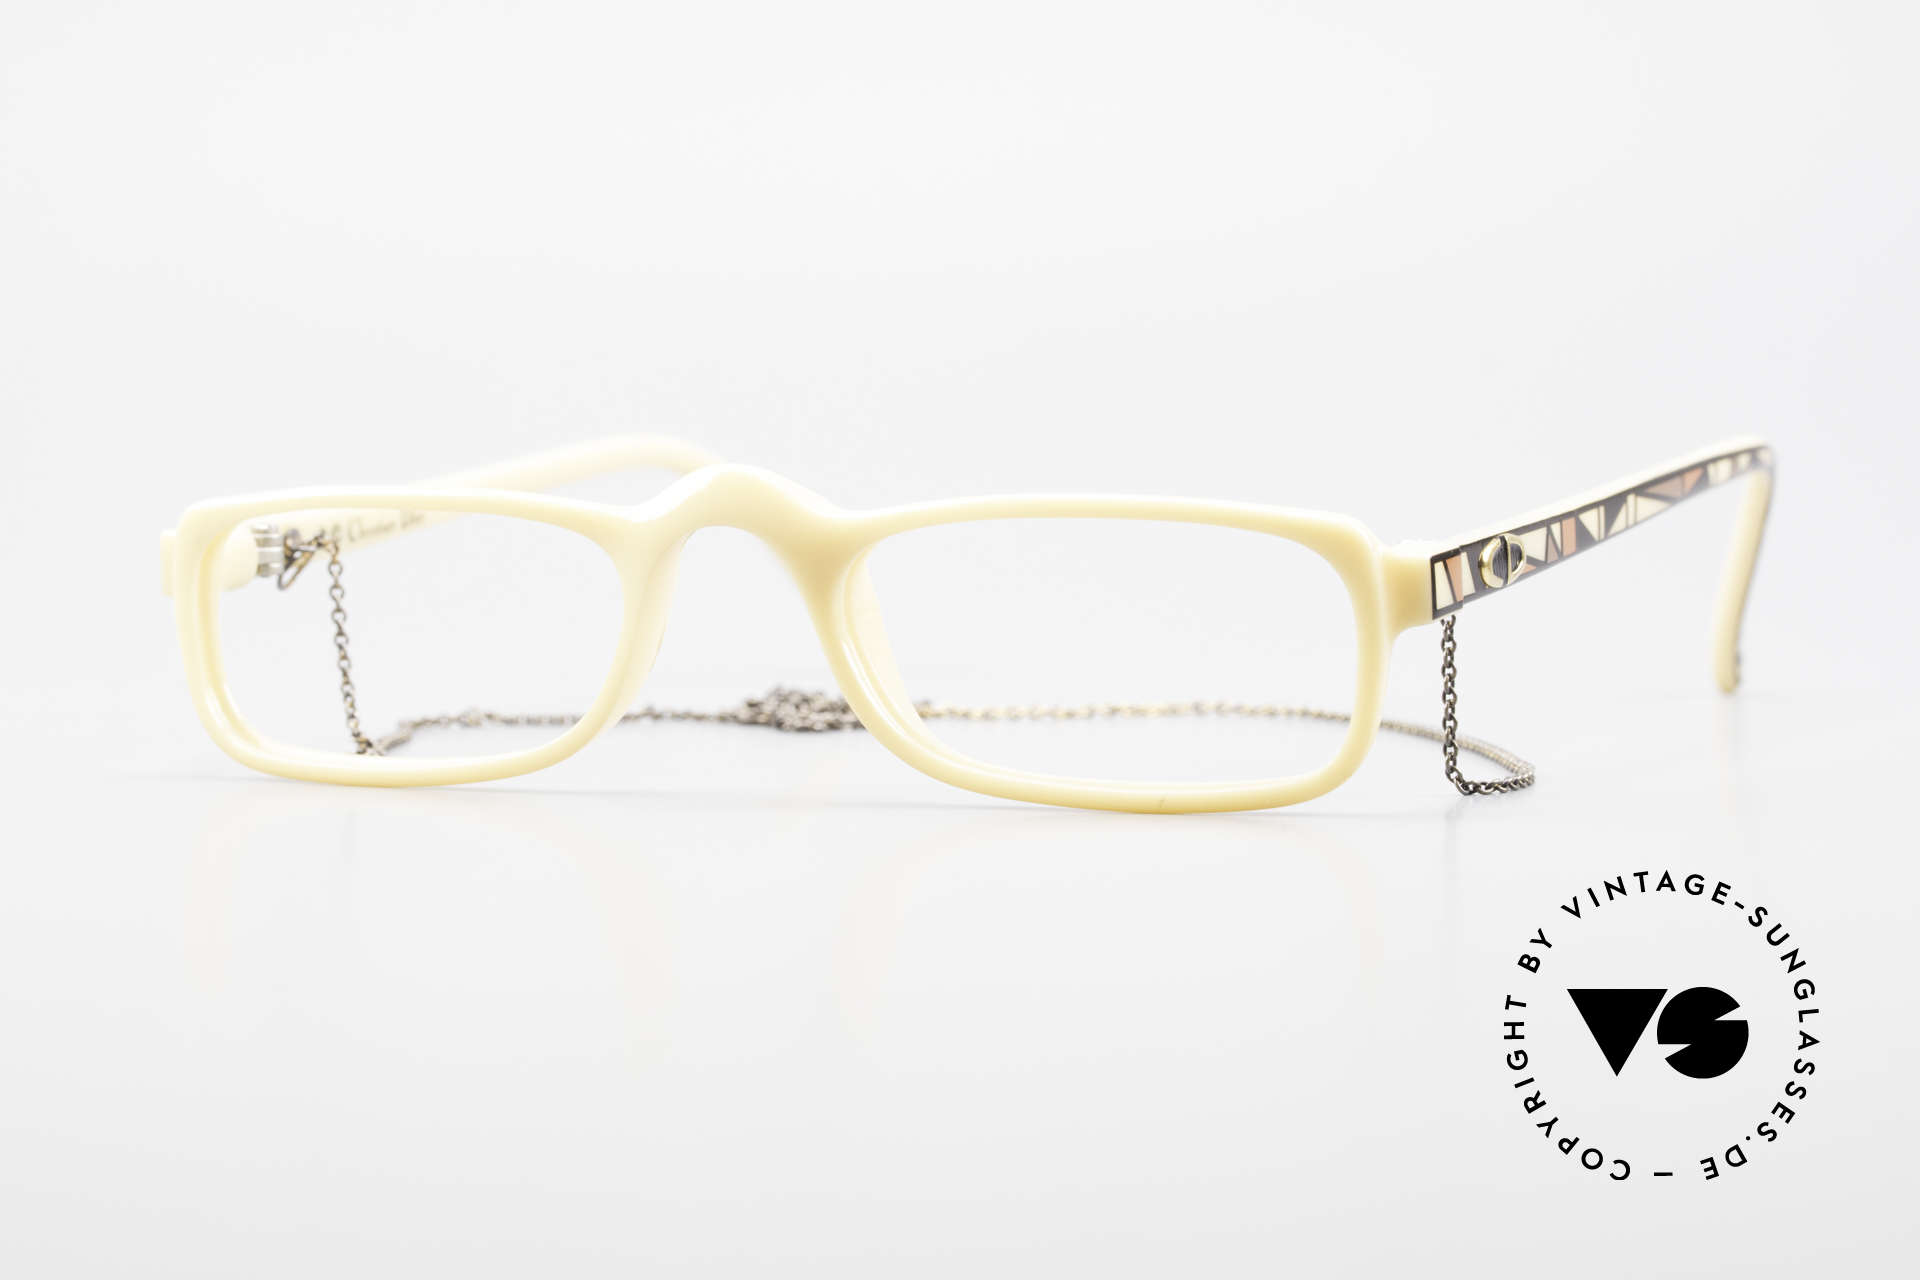 Christian Dior 2356 Reading Glasses With Chain, vintage DIOR reading glasses from 1989 with a chain, Made for Men and Women